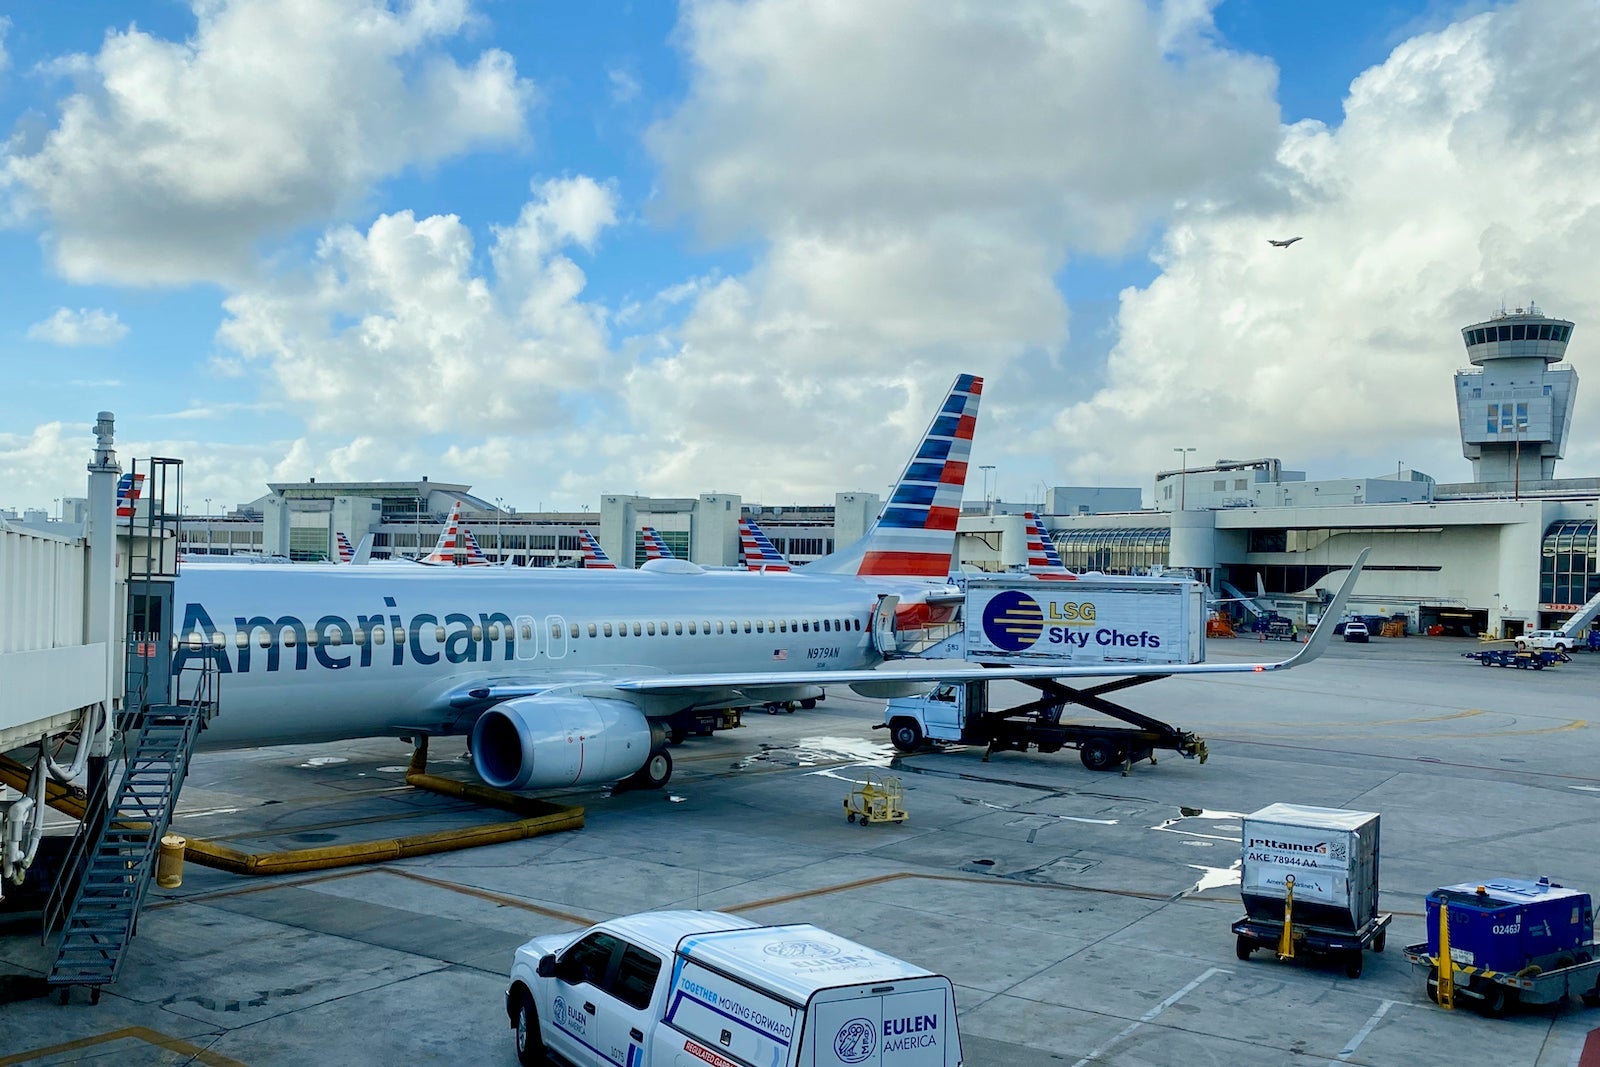 American Airlines adds 8 new and expanded leisure-focused routes